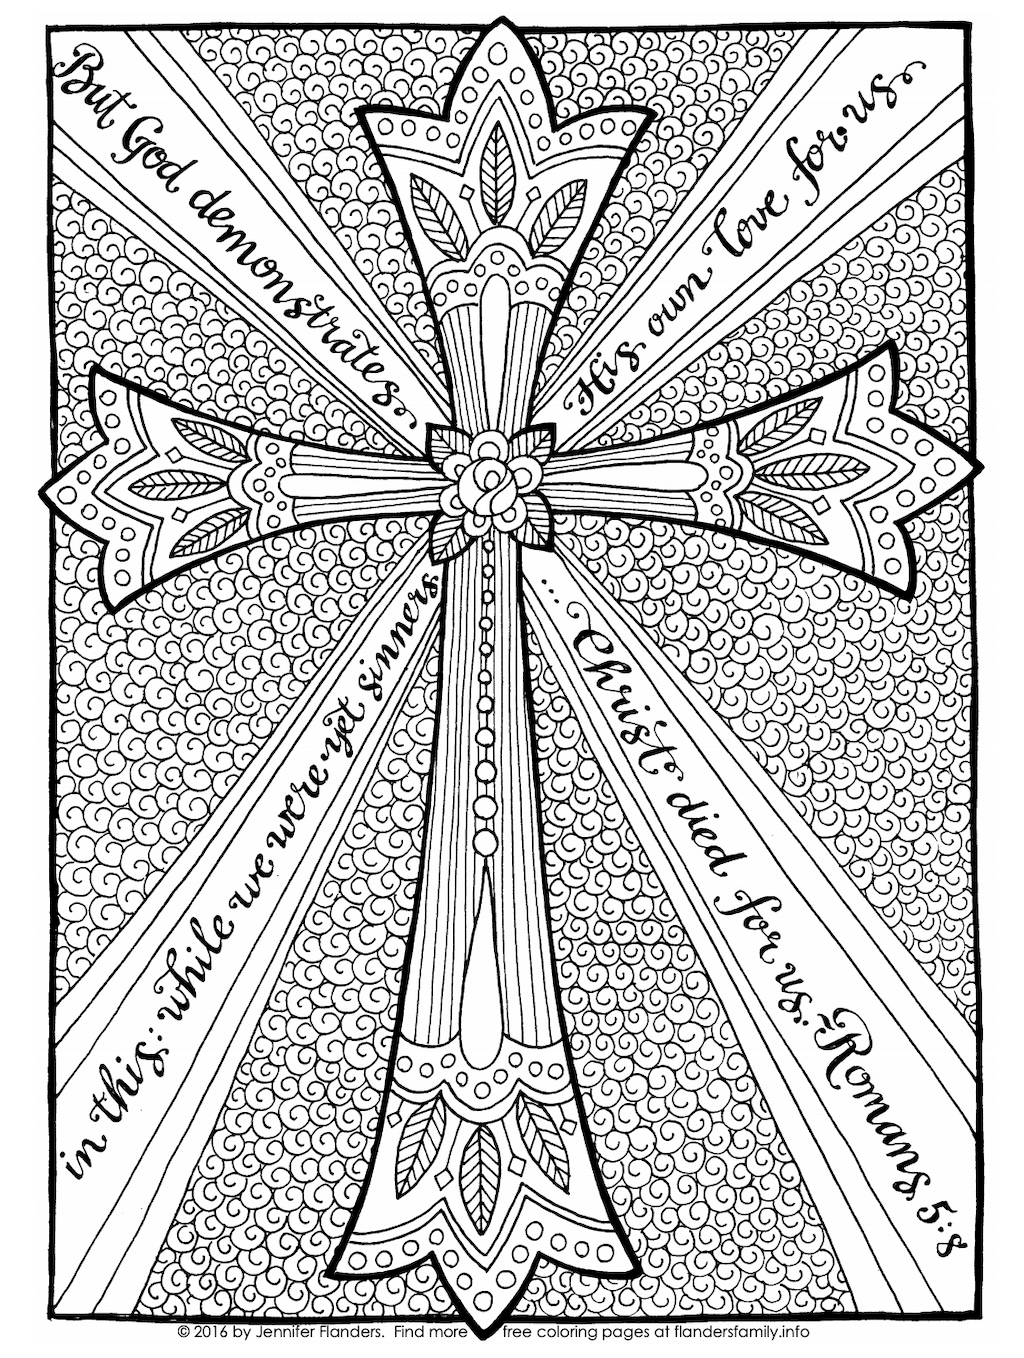 Cross of Christ Coloring Page - Flanders Family Homelife